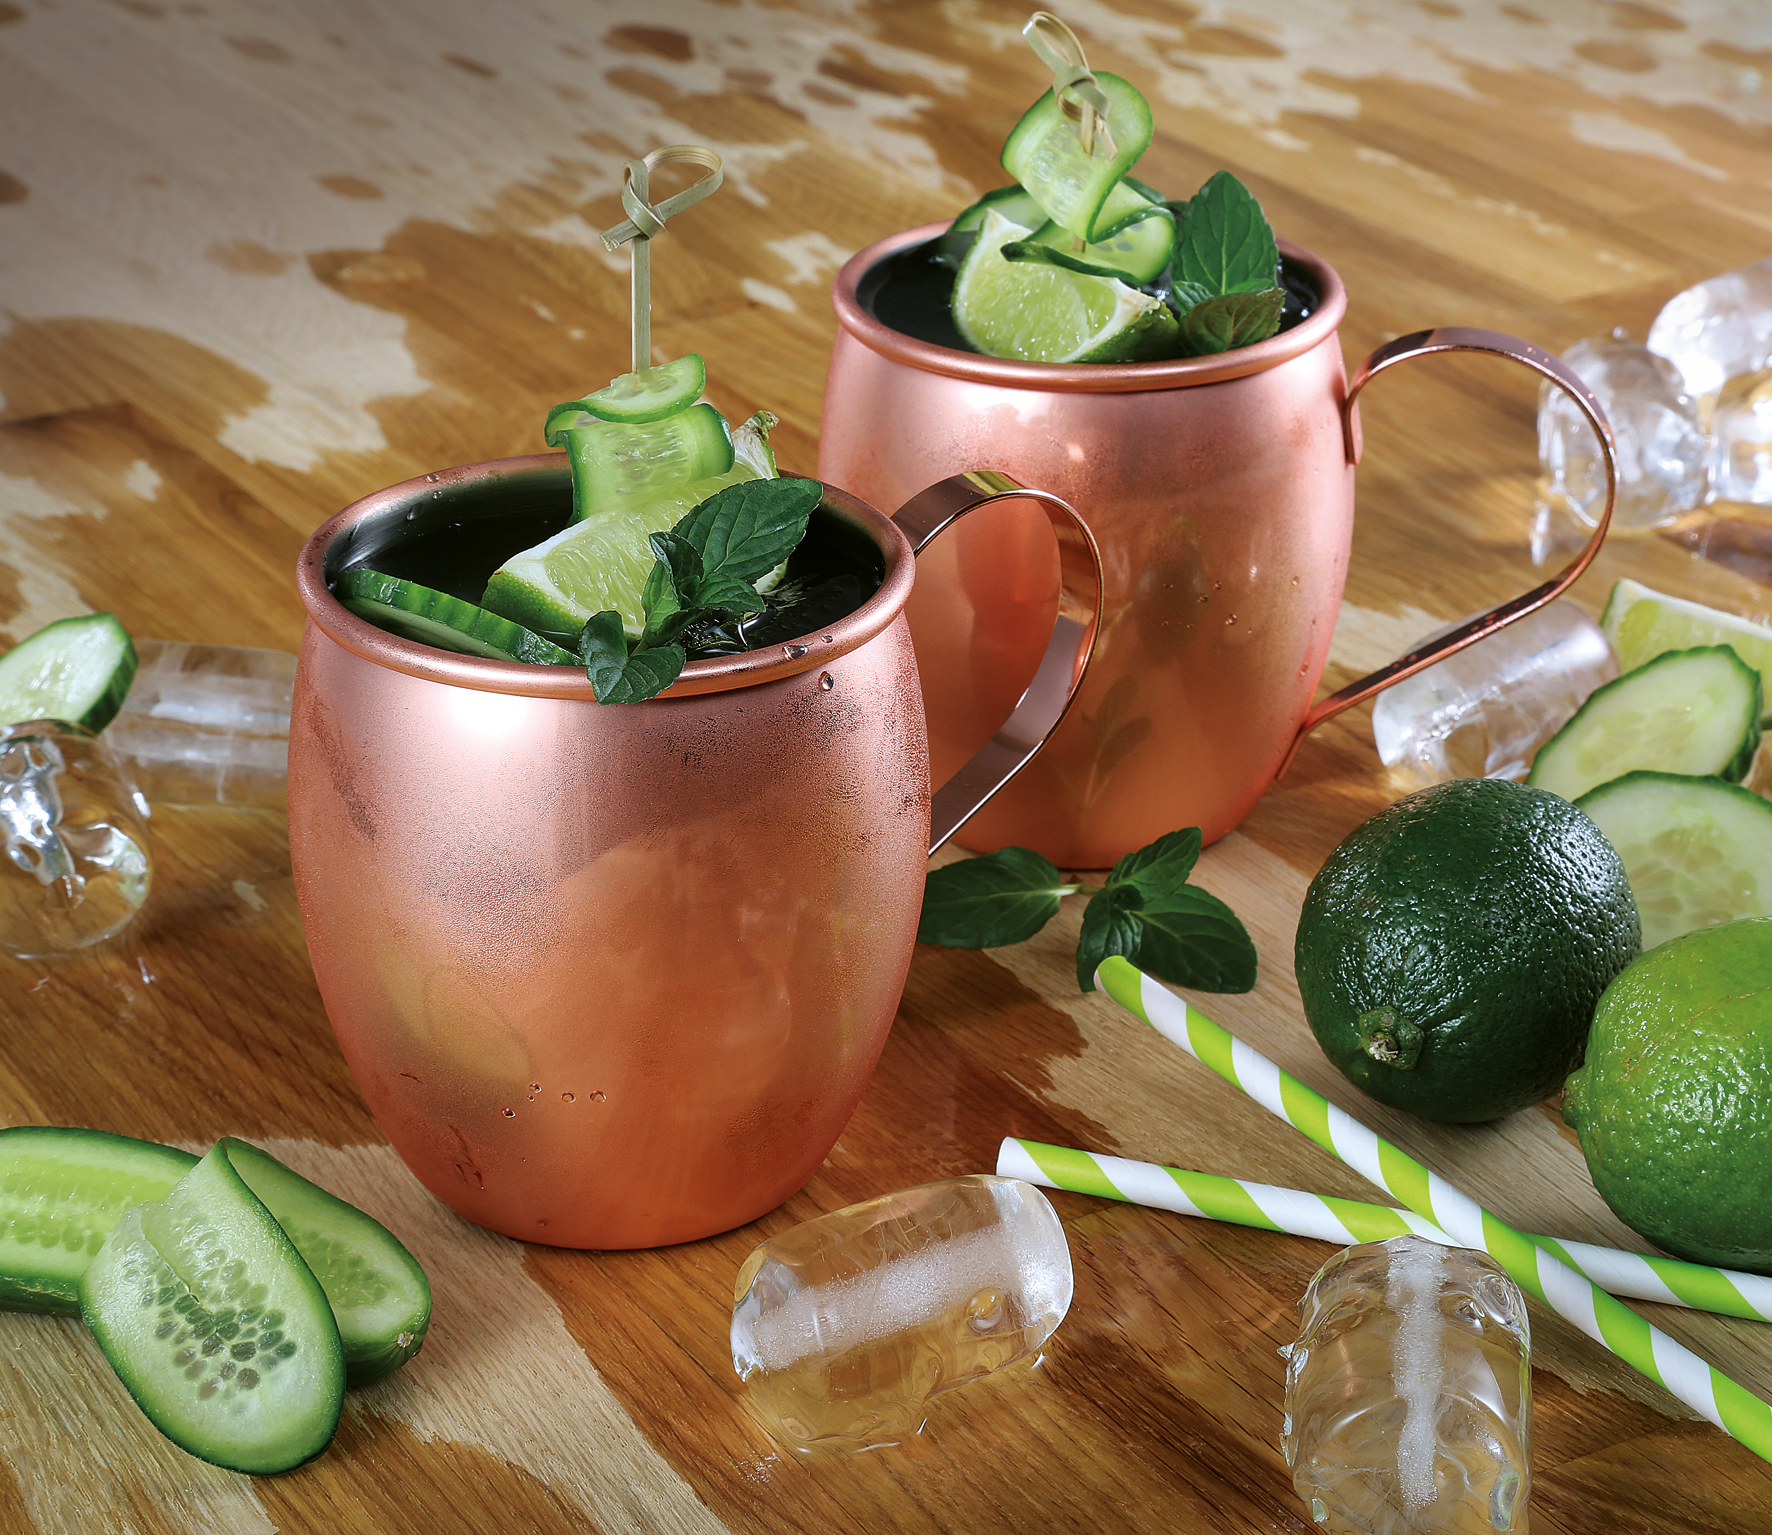 Cilio - Becher MOSCOW MULE poliert